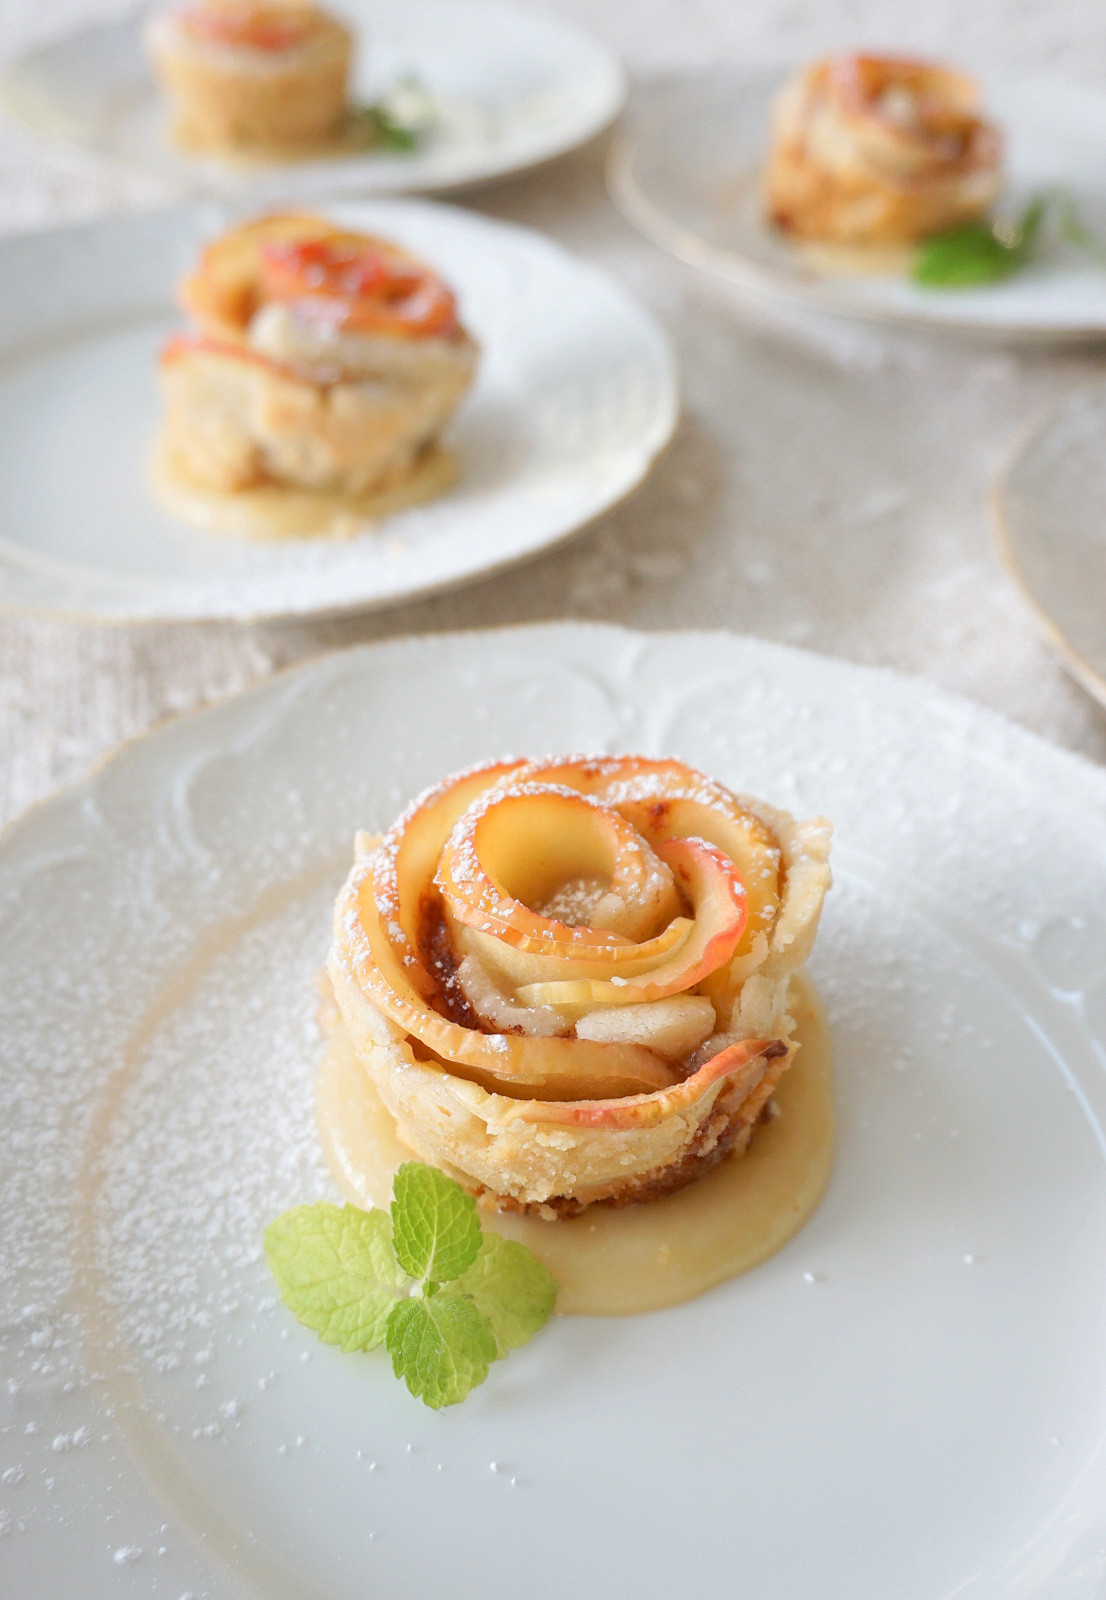 Apple Blossom Dessert
 Apple Blossoms drenched in Rum Caramel Sauce Baking for